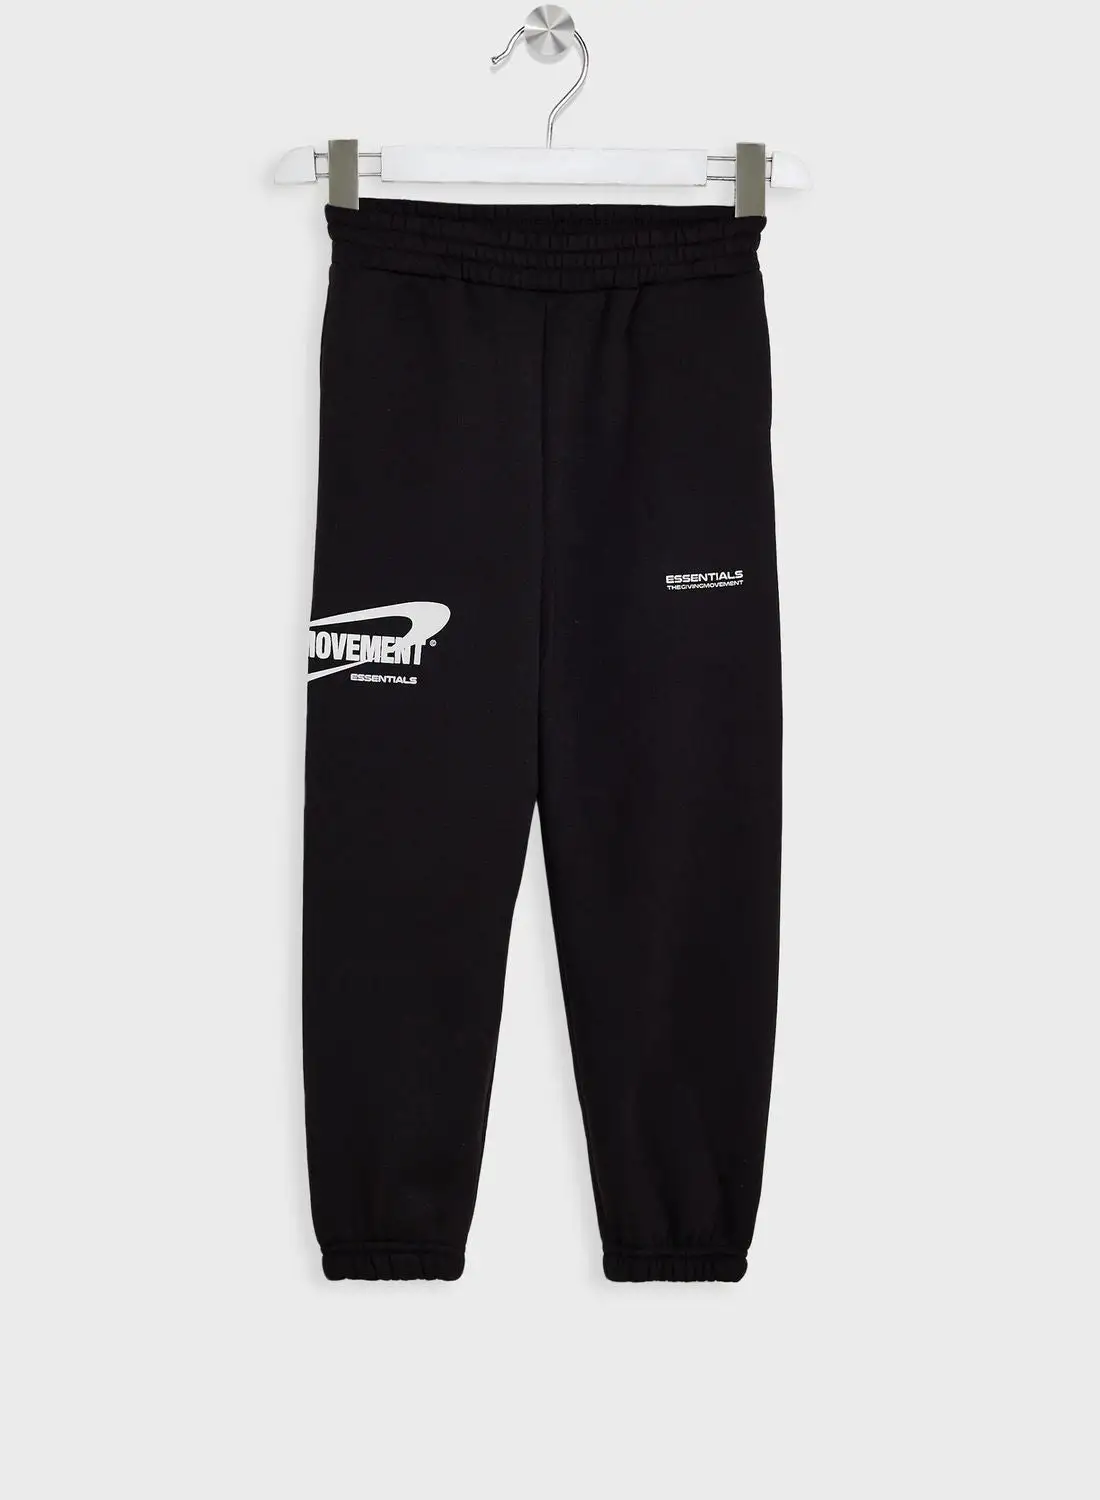 The Giving Movement Kids Space Printed Joggers